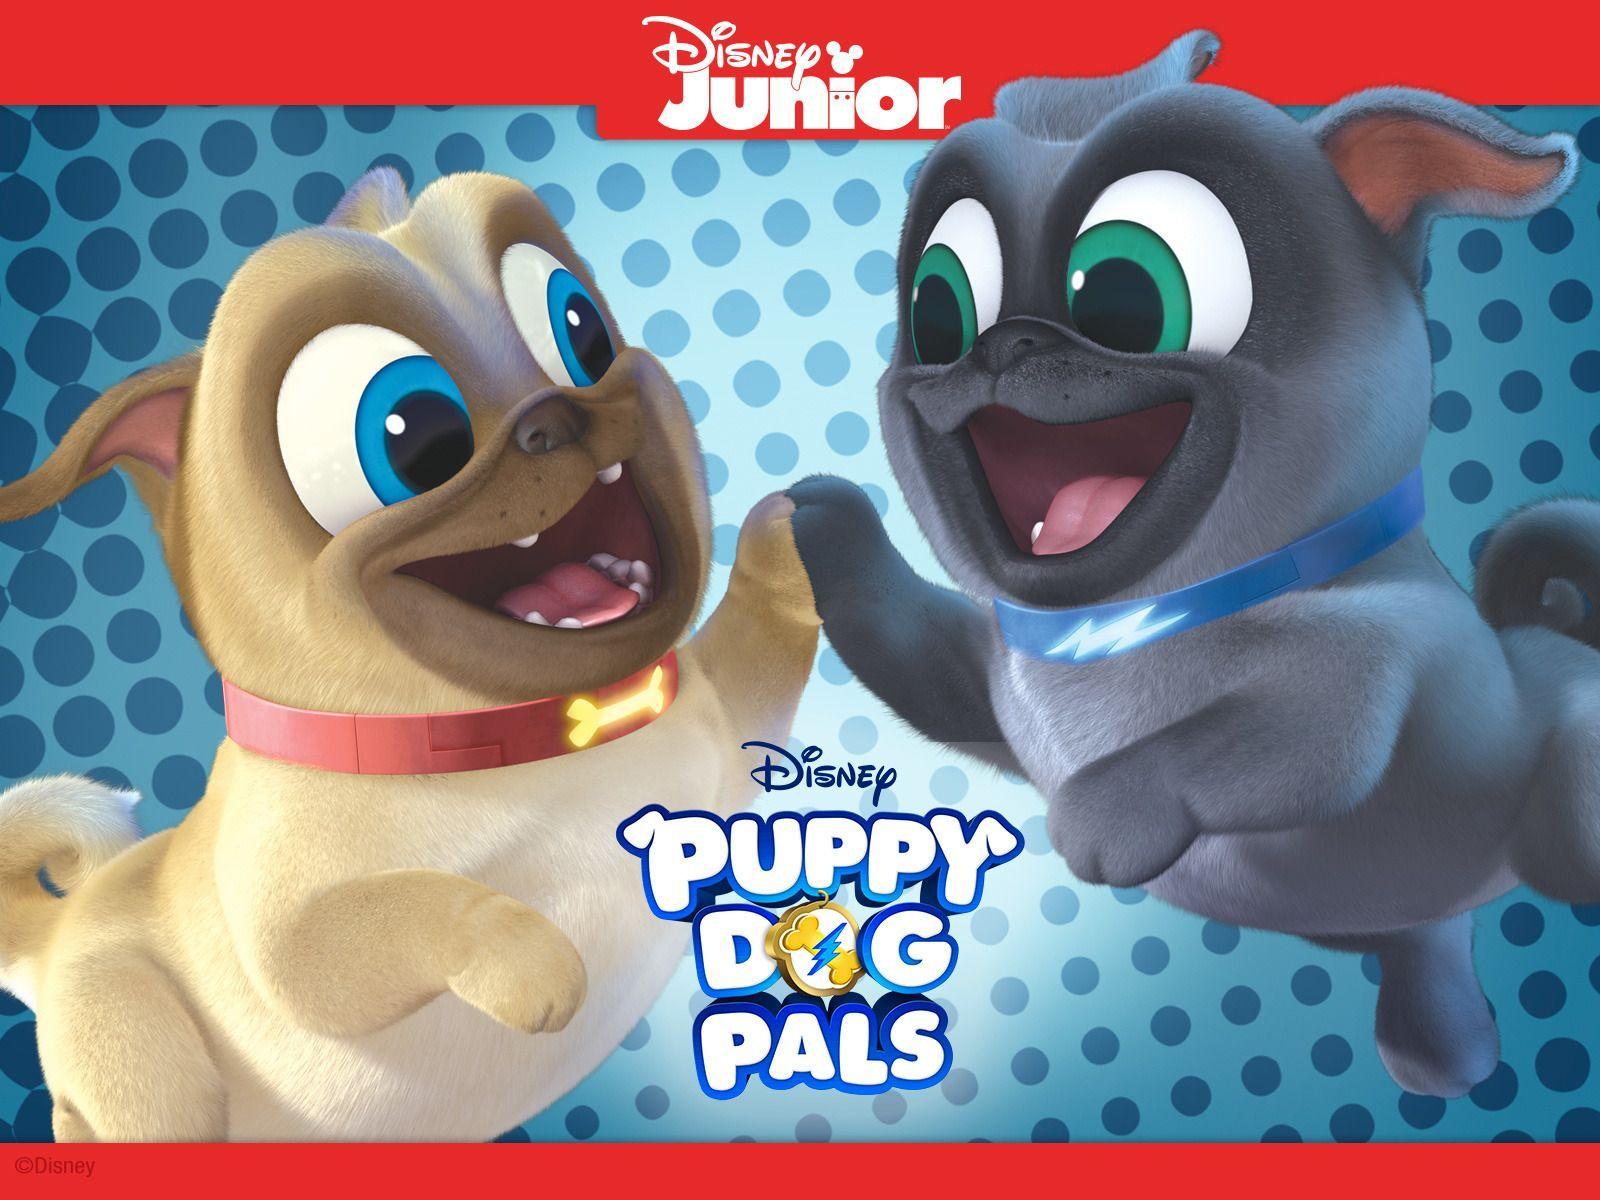 Puppy Dog Pals Wallpapers - Top Free Puppy Dog Pals Backgrounds ...